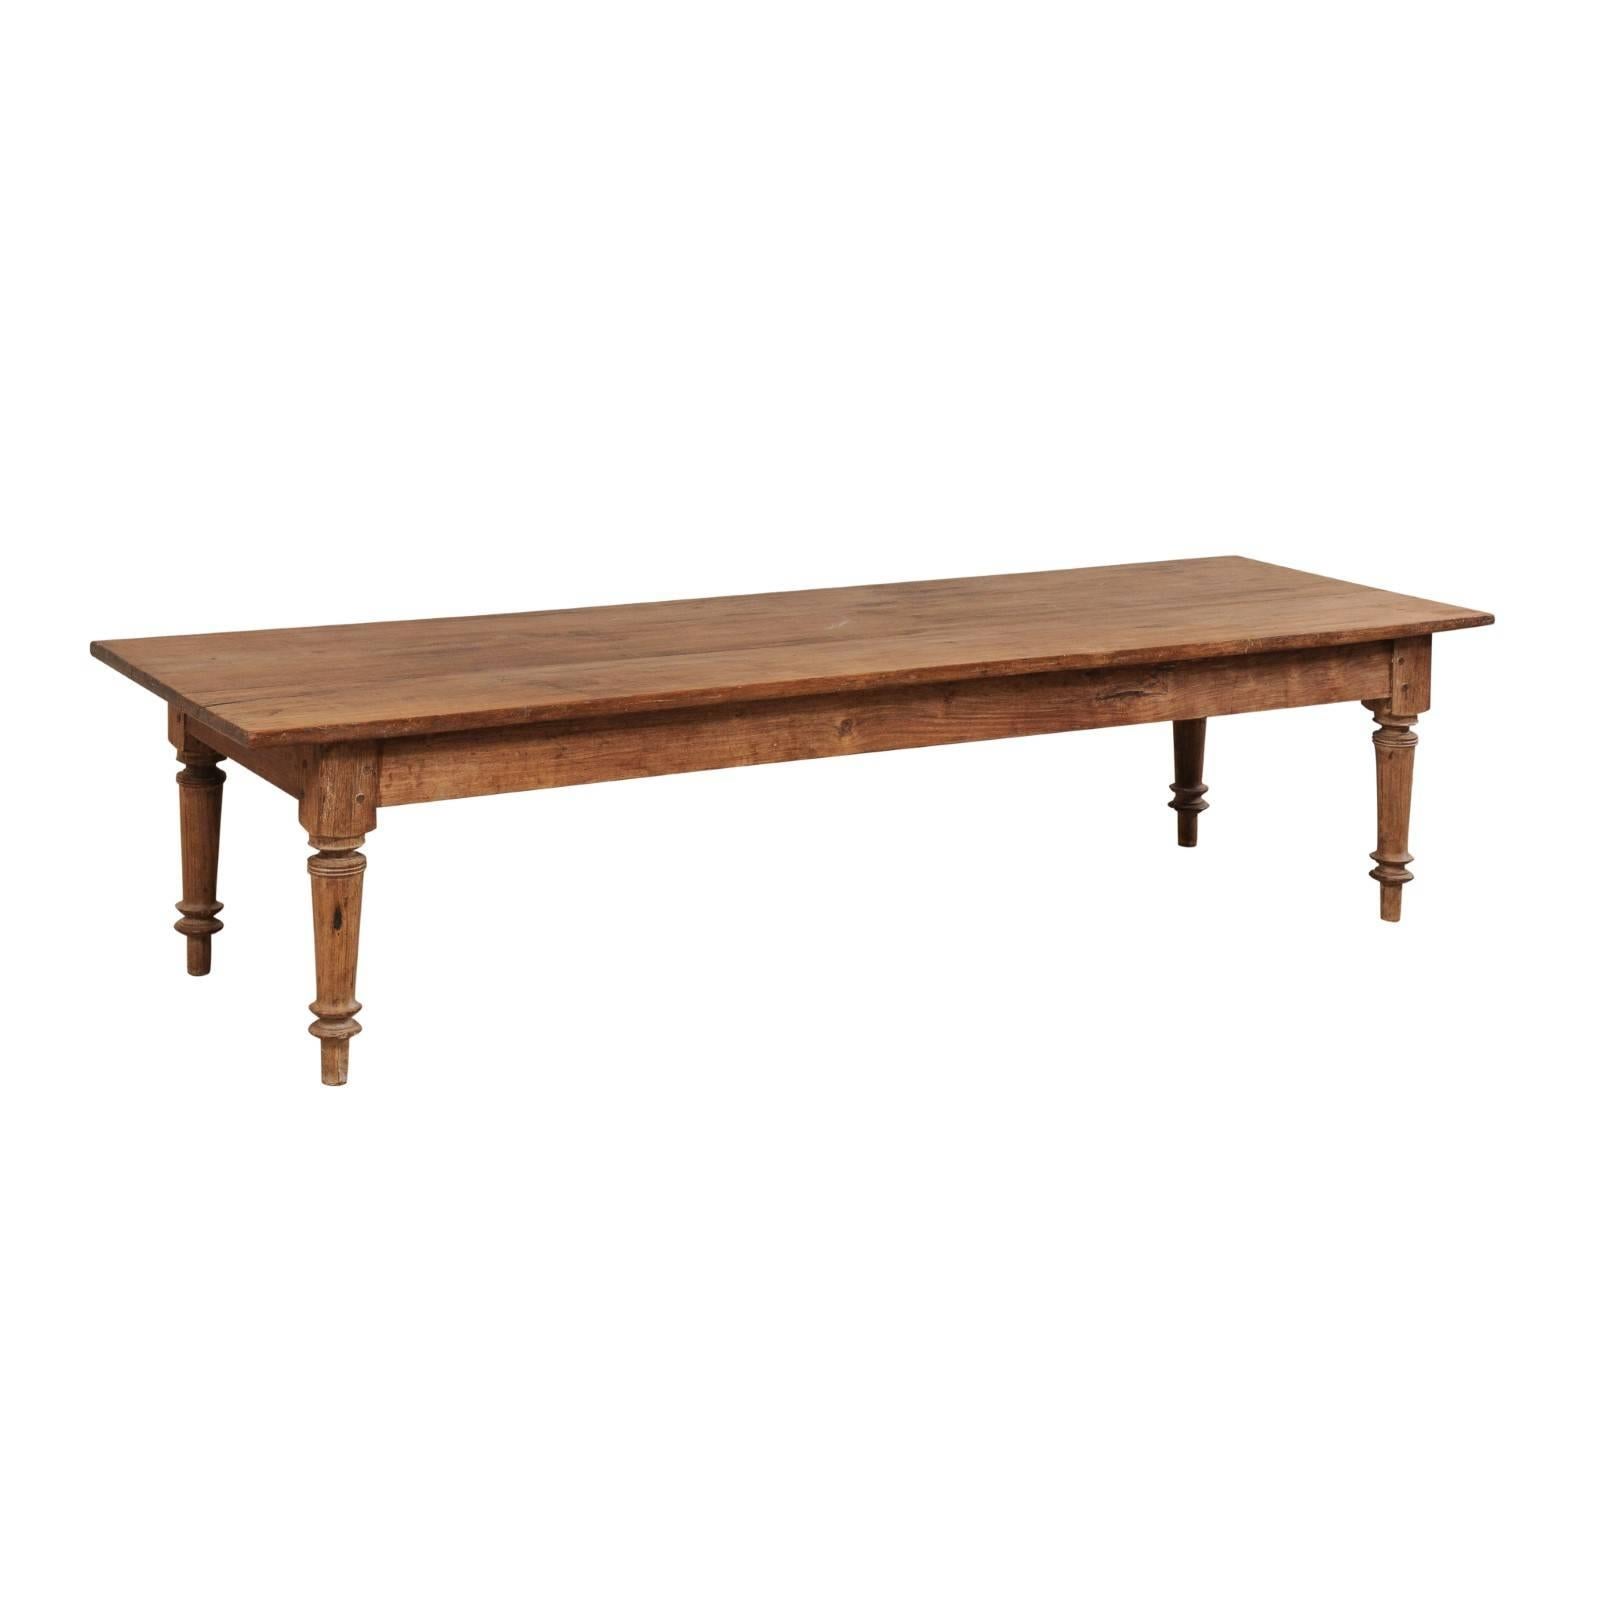 Antique Brazilian Wood Table or Bench from the Early 20th Century